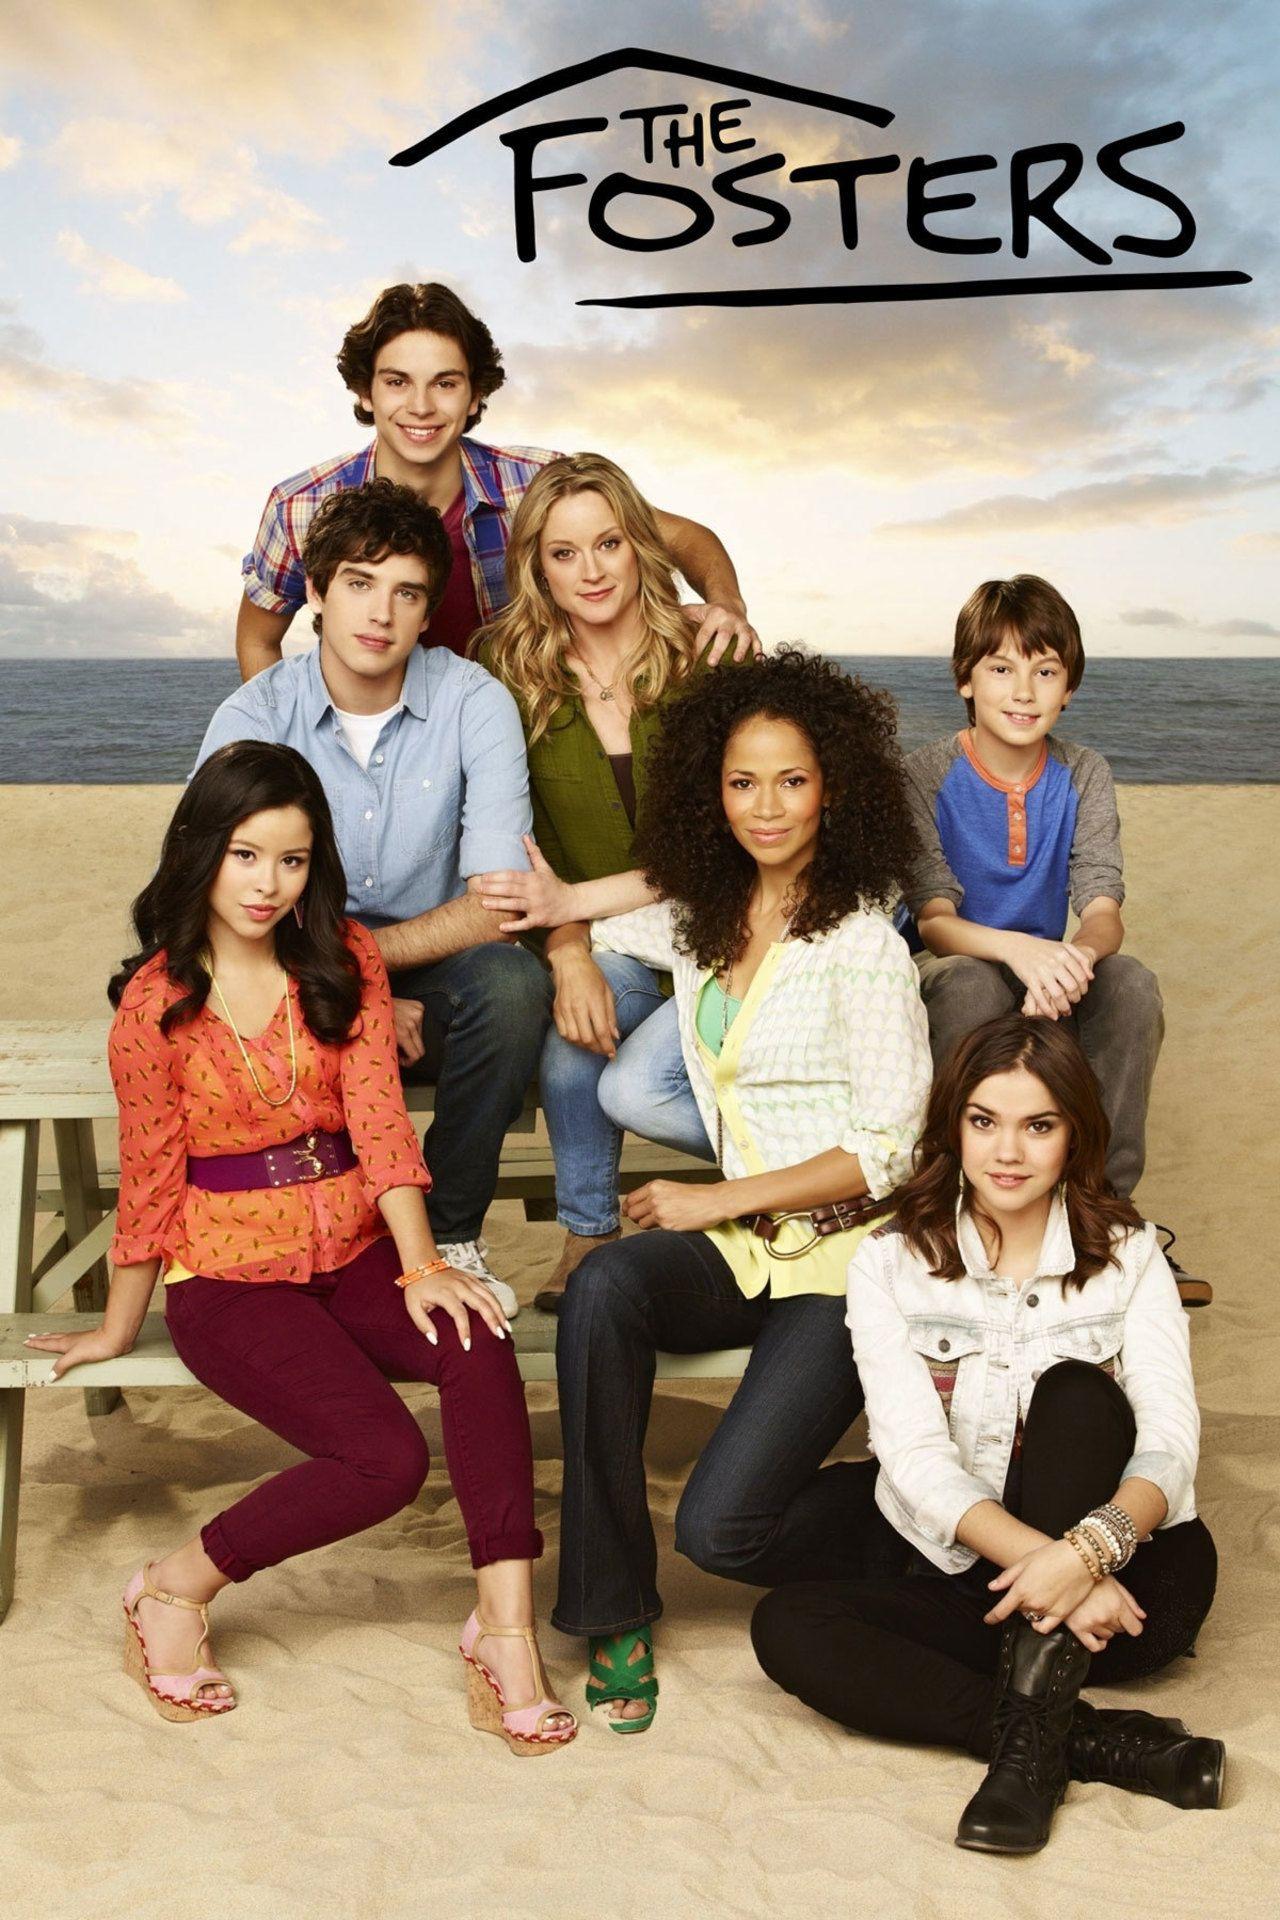 Watch The Fosters Online Free. The Fosters Episodes at